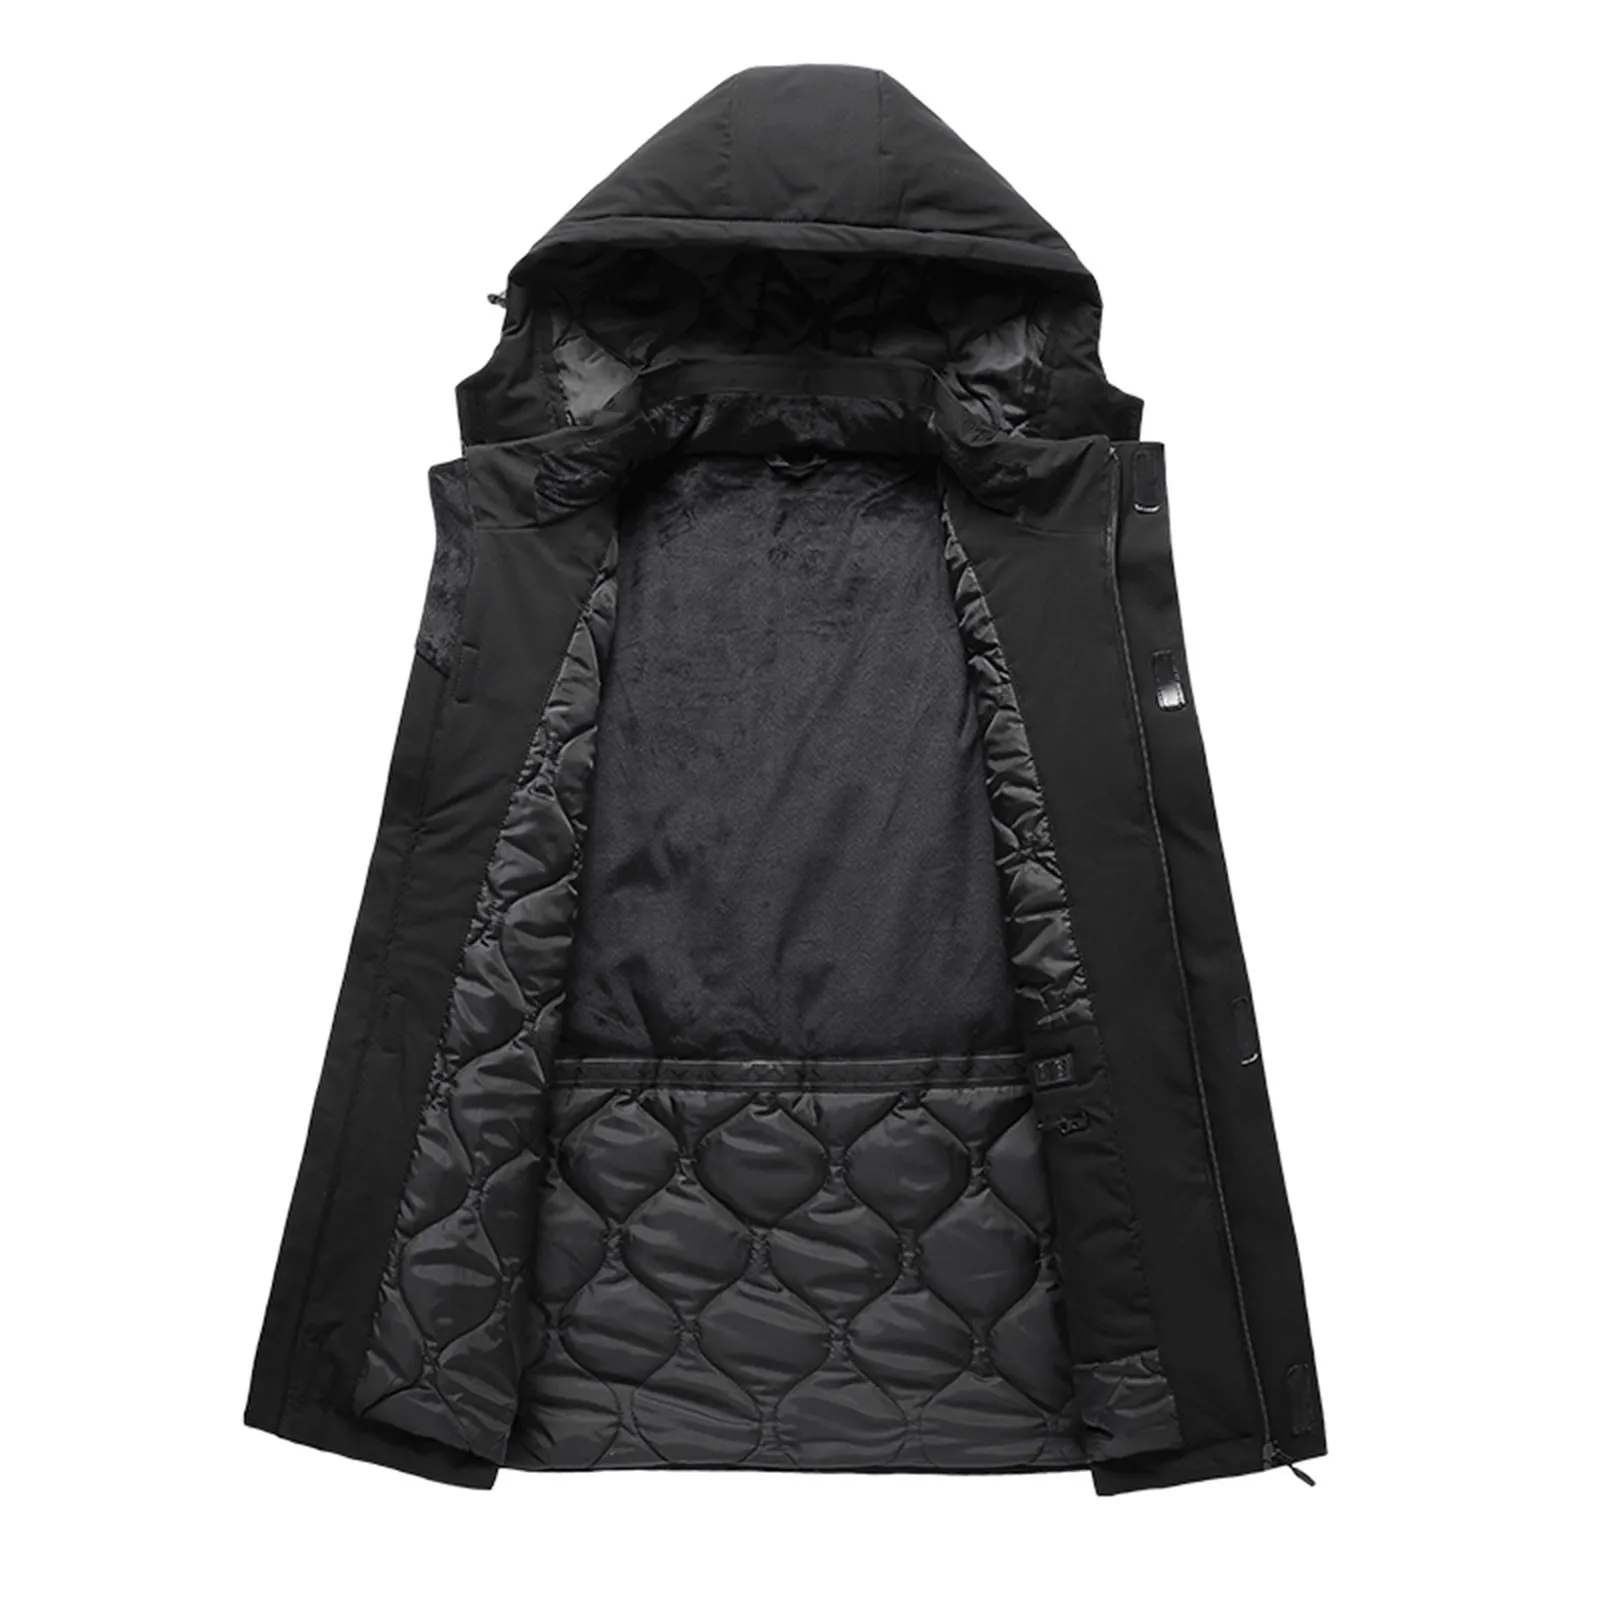 Outdoor Winter Padded Jacket 9 Constant Temperature Heating Warm Hooded Jacket winter jaqueta masculina inverno Fashion New 2022